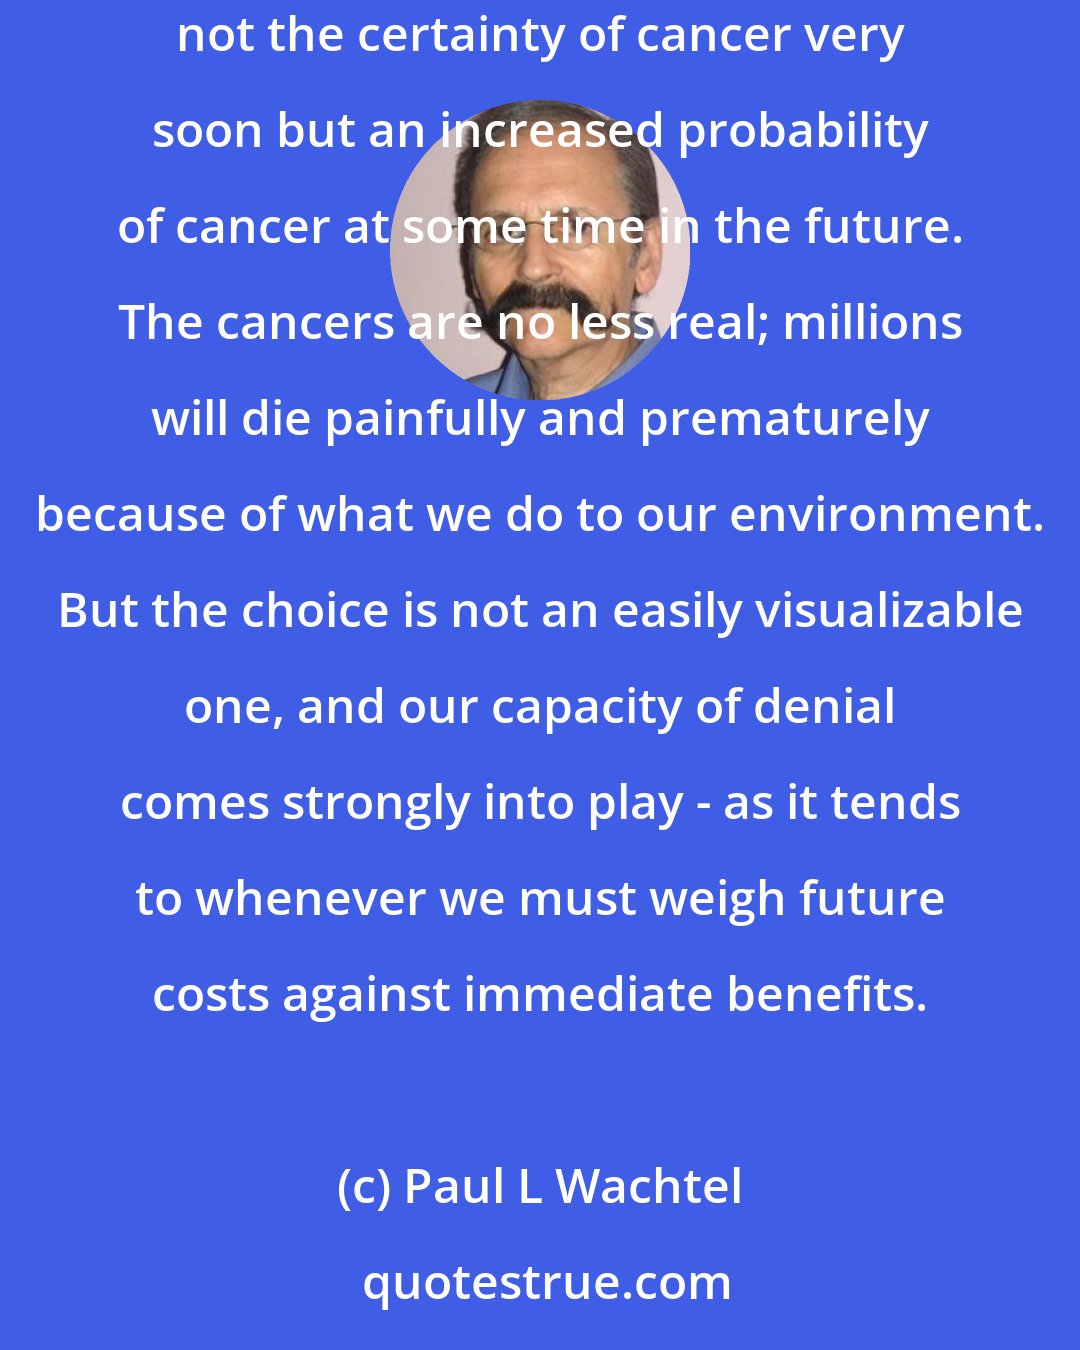 Paul L Wachtel: Very few people would choose to have even the most fabled assortment of goods if it meant getting cancer within the year. But the choice involves not the certainty of cancer very soon but an increased probability of cancer at some time in the future. The cancers are no less real; millions will die painfully and prematurely because of what we do to our environment. But the choice is not an easily visualizable one, and our capacity of denial comes strongly into play - as it tends to whenever we must weigh future costs against immediate benefits.